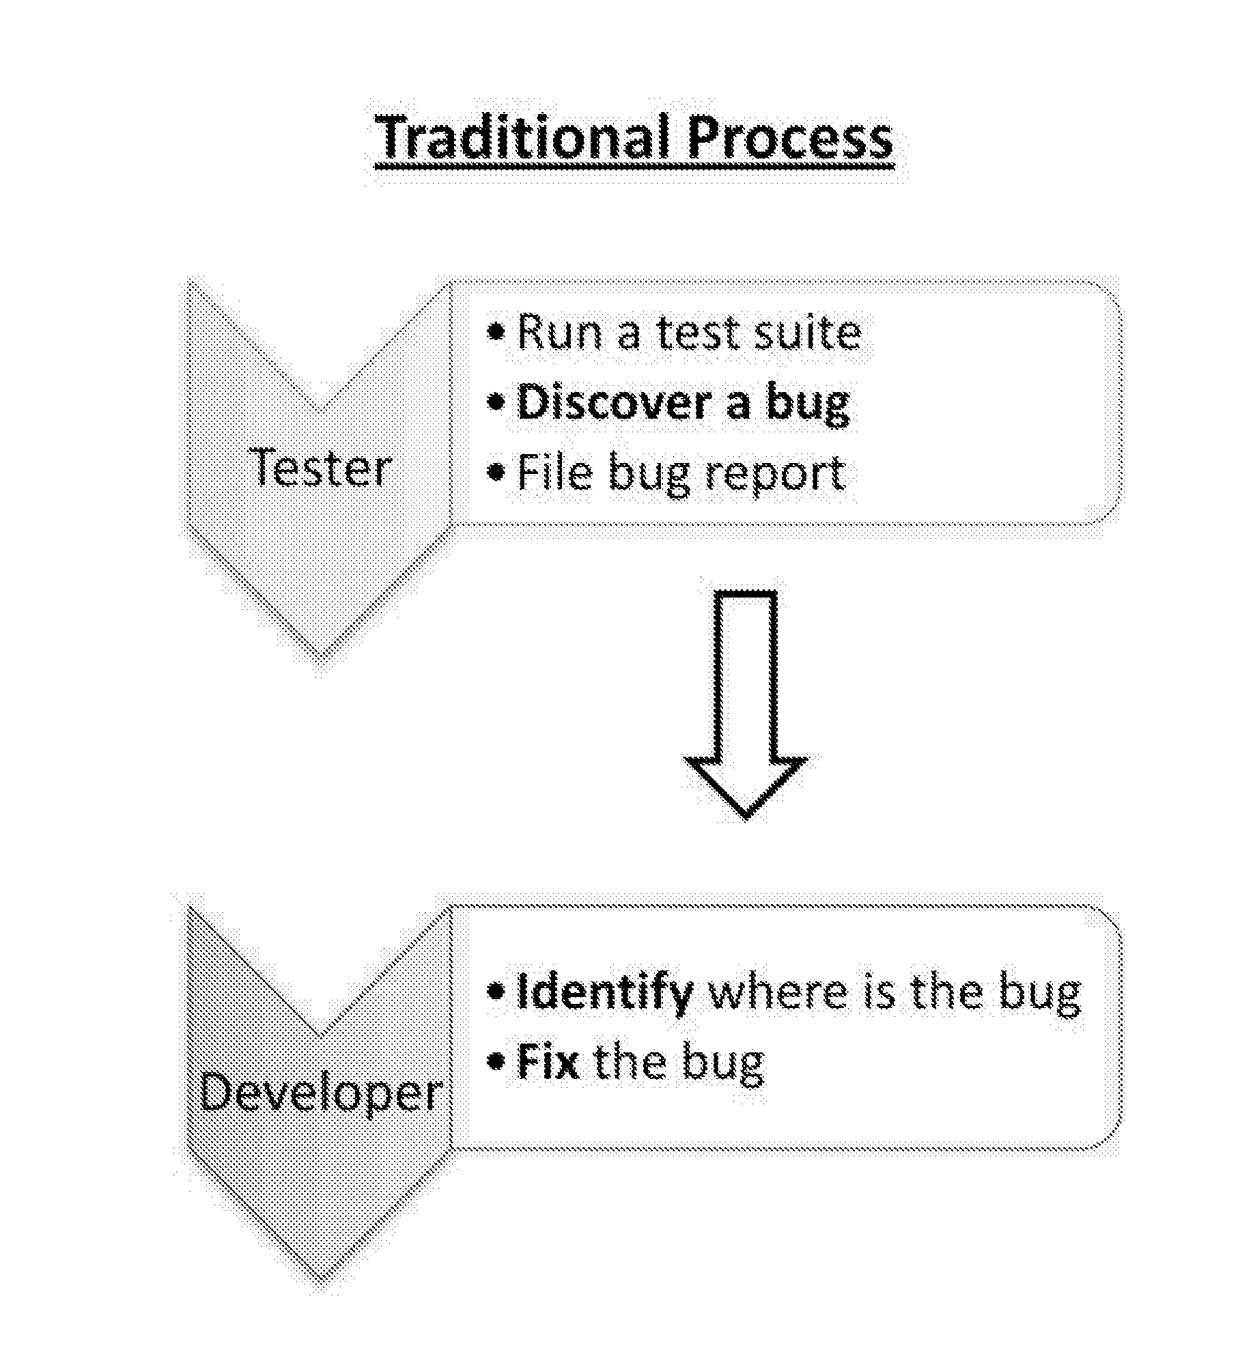 Using model-based diagnosis to improve software testing